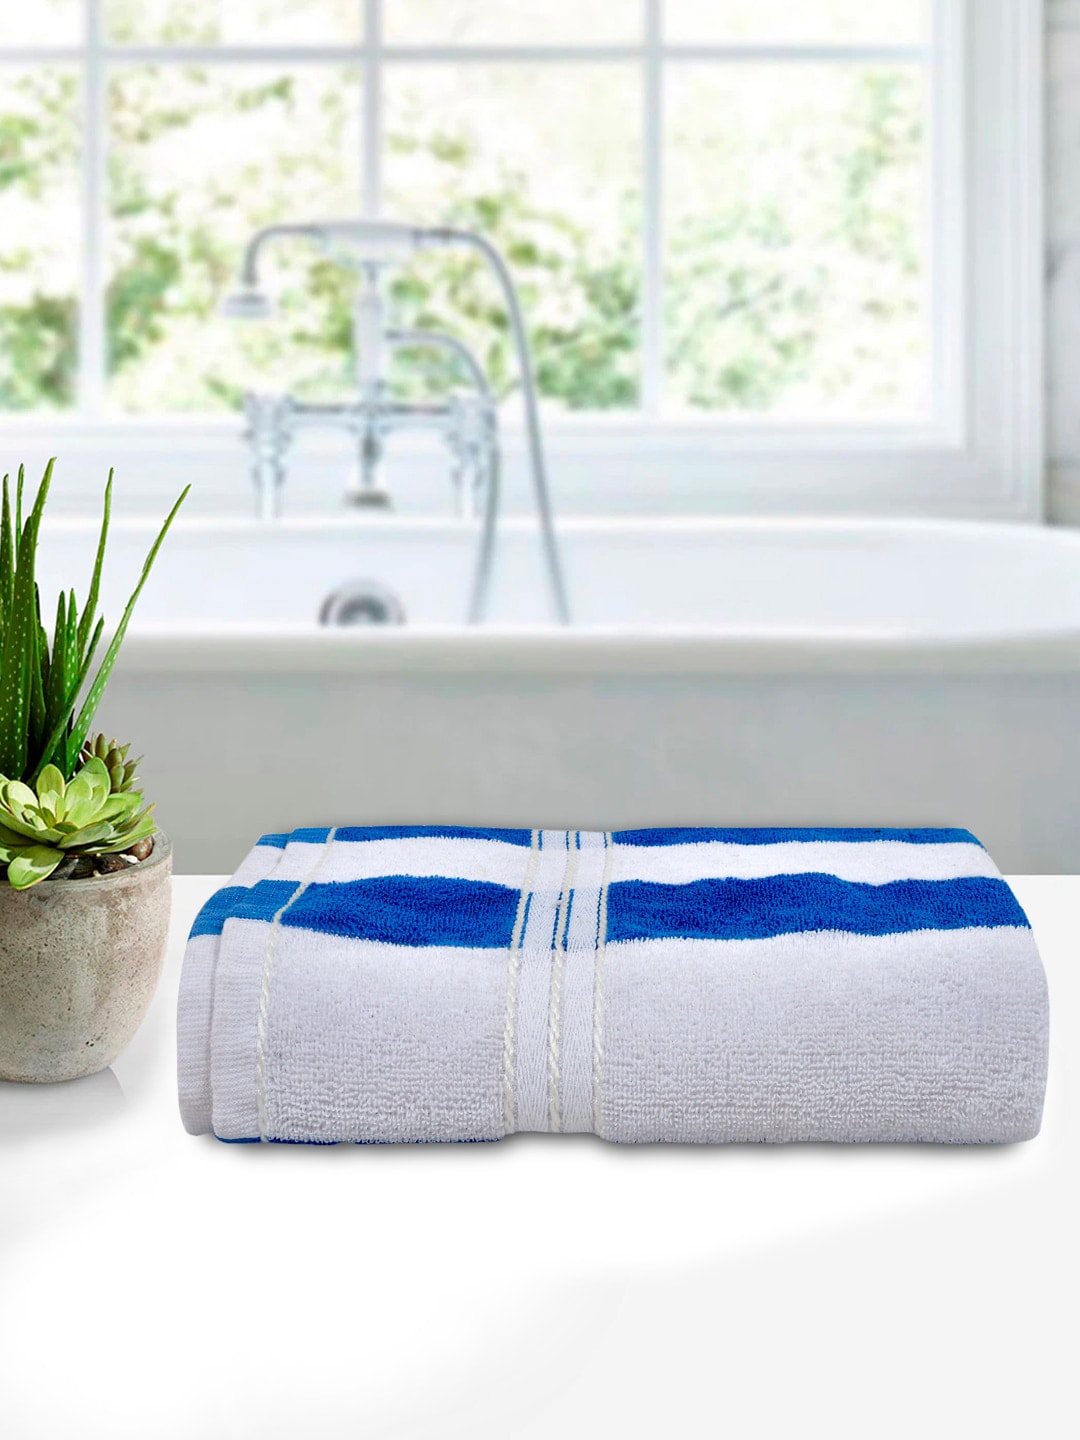 Kuber Industries White & Blue Striped 400 GSM Cotton Bath Towel Price in India